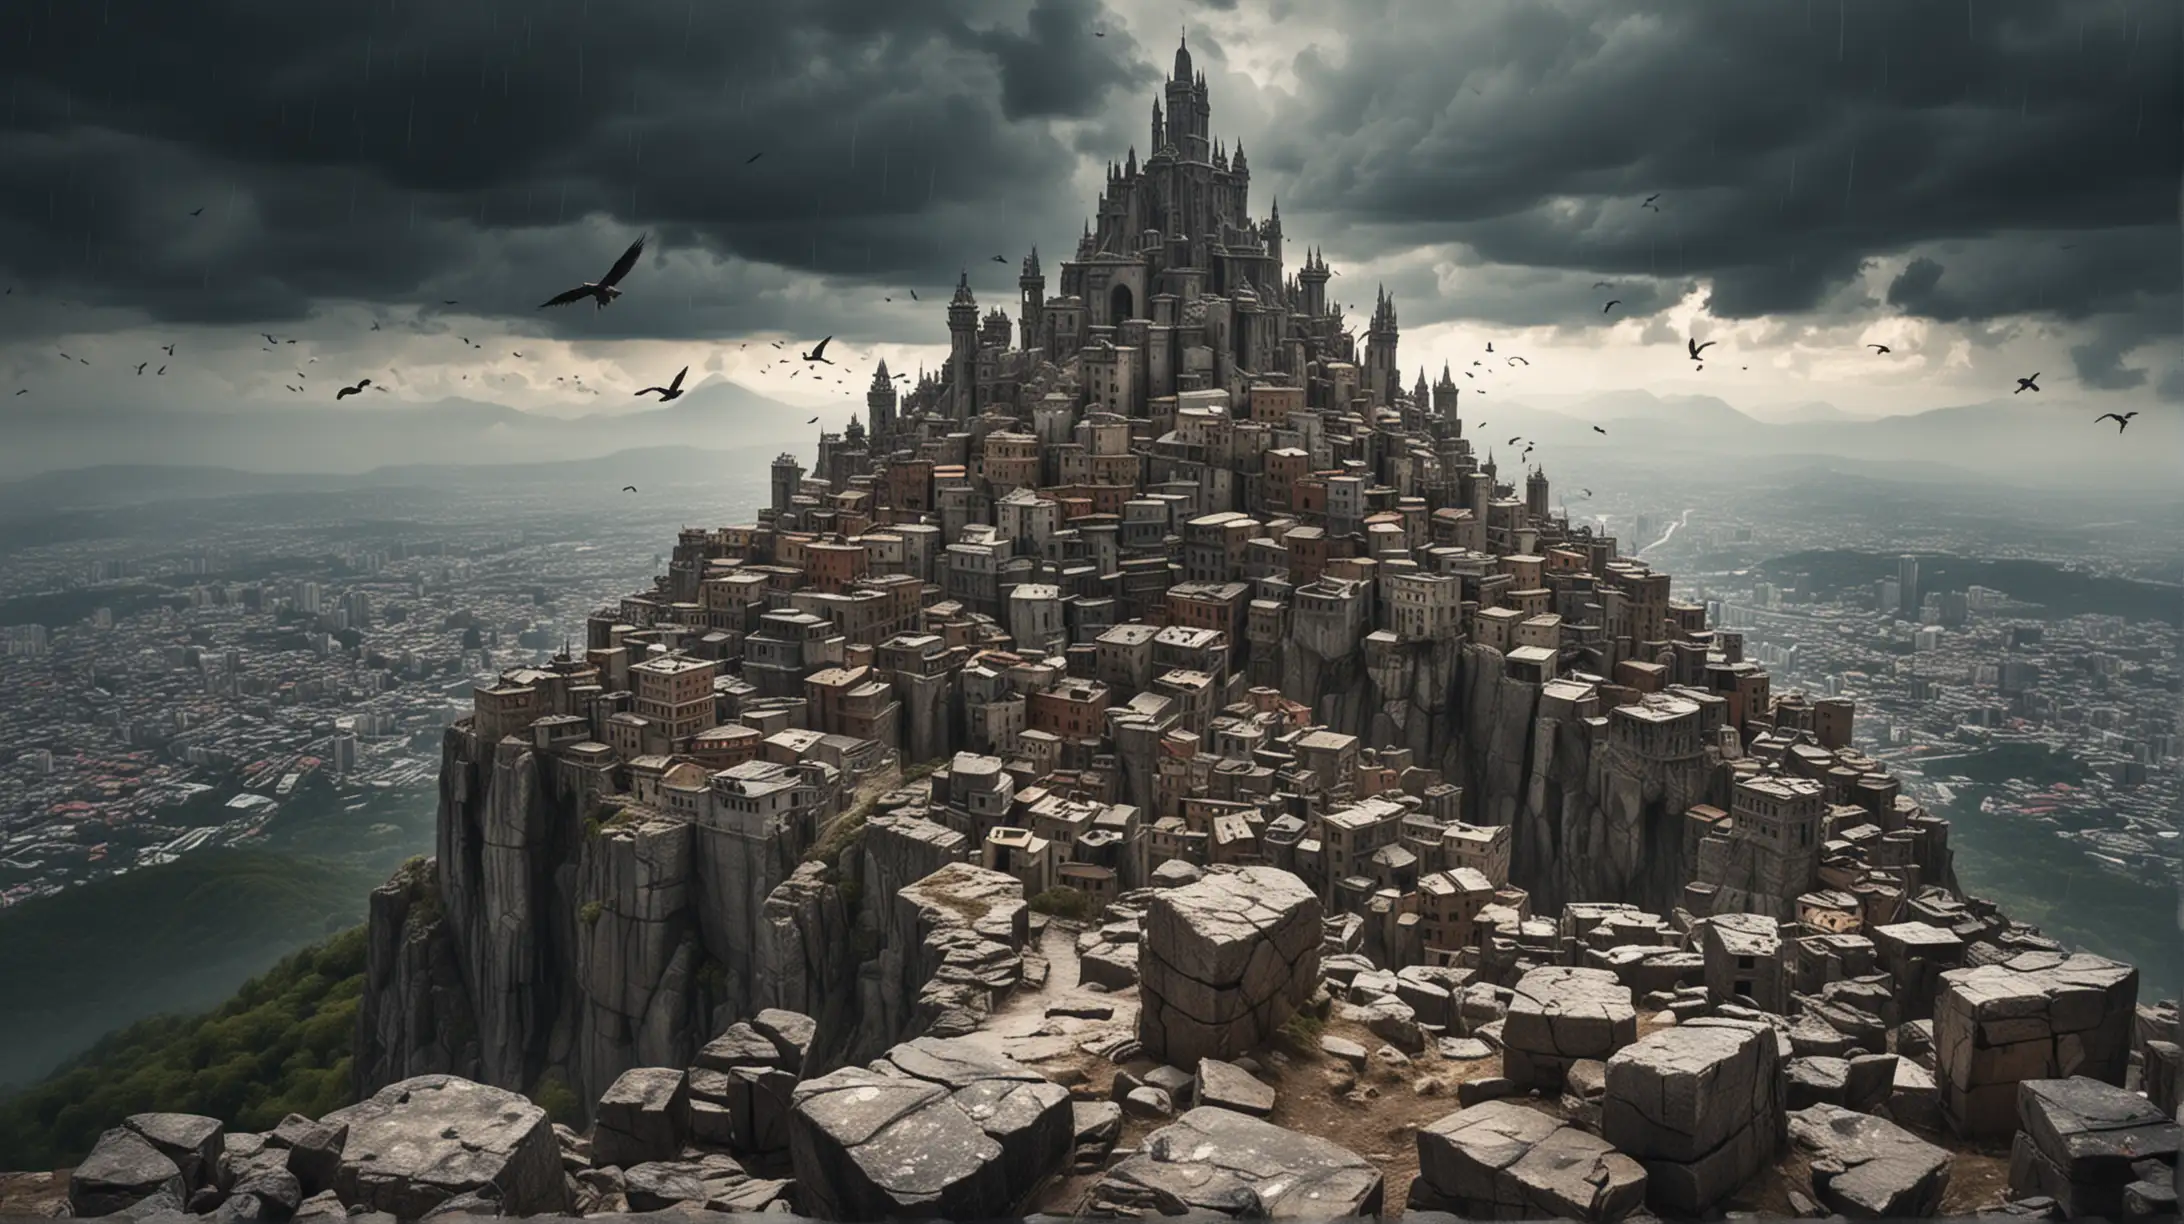 Majestic Stone City Perched Atop Towering Mountain Amidst Stormy Weather